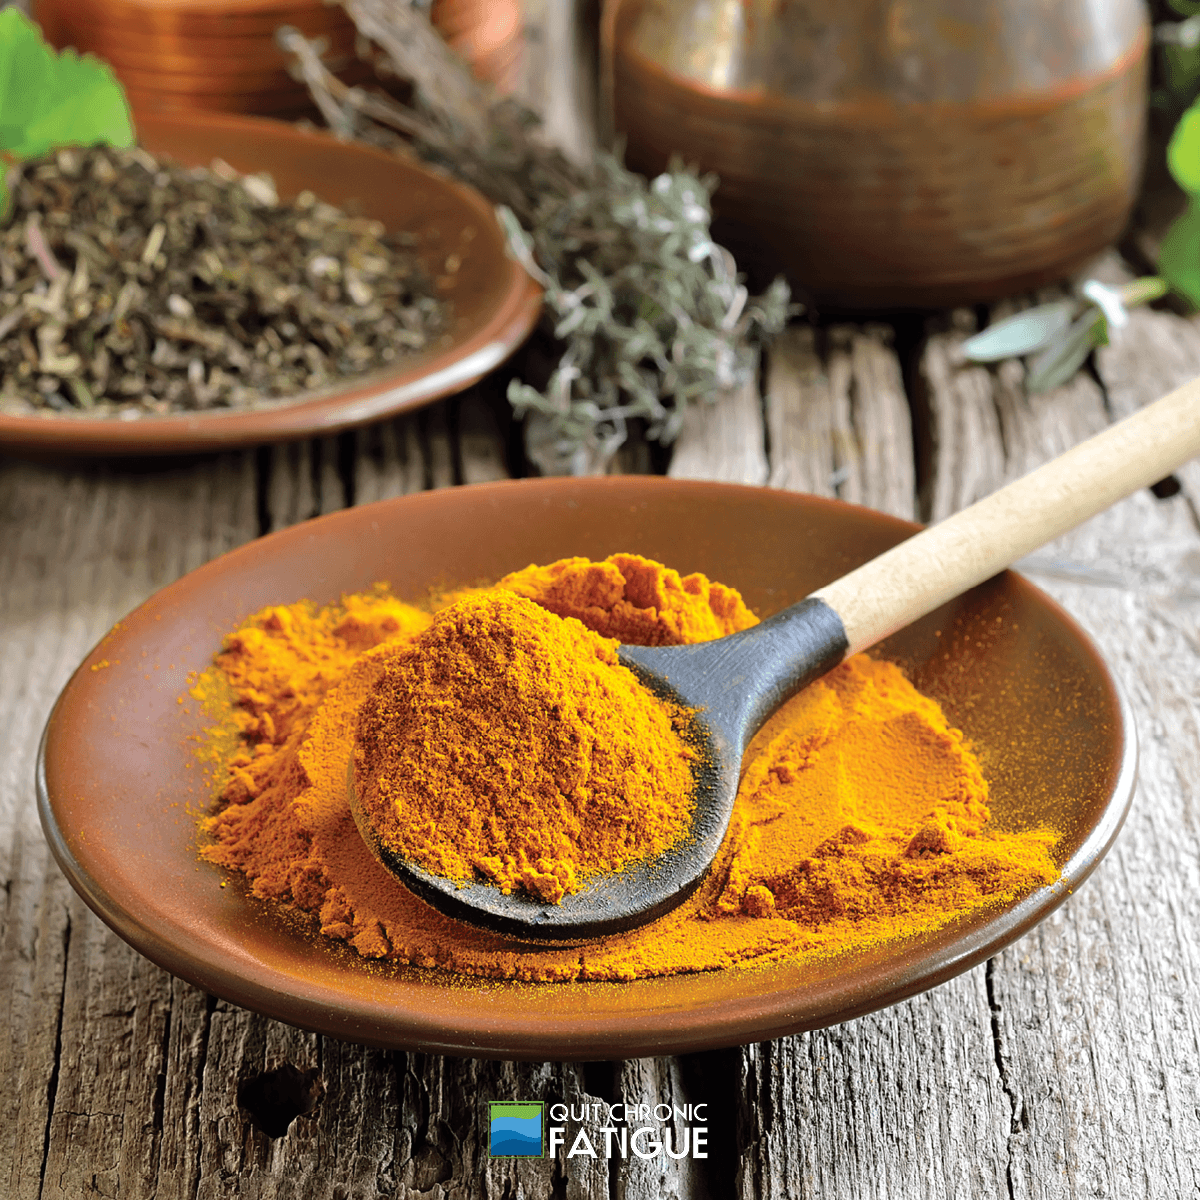 Turmeric-for-Fibromyalgia-and-CFS:-Could-it-Help-Relieve-Your-Symptoms?